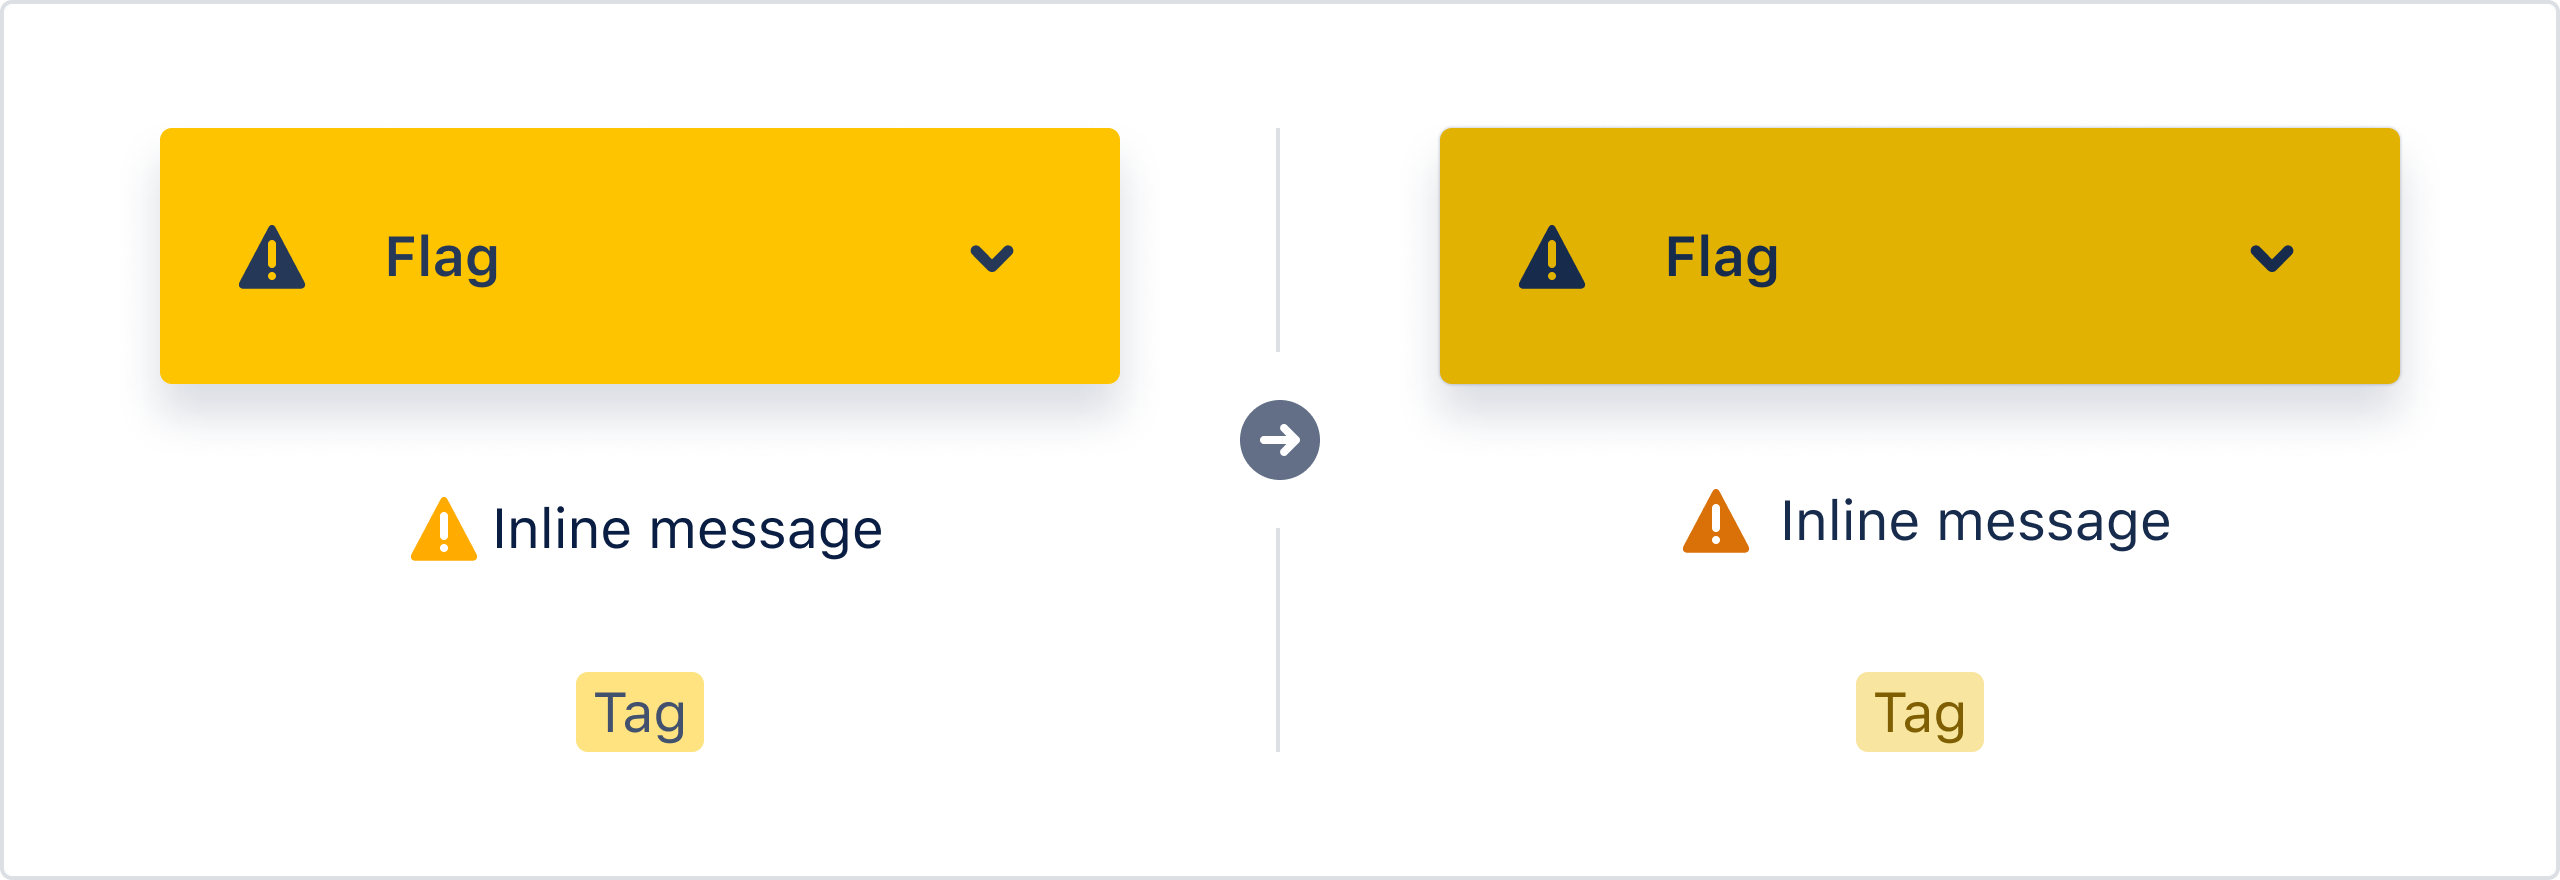 Comparison of a yellow flag message, icon, and tag in the old system and in the new system. The newer ones are darker and have more contrast against the white background.